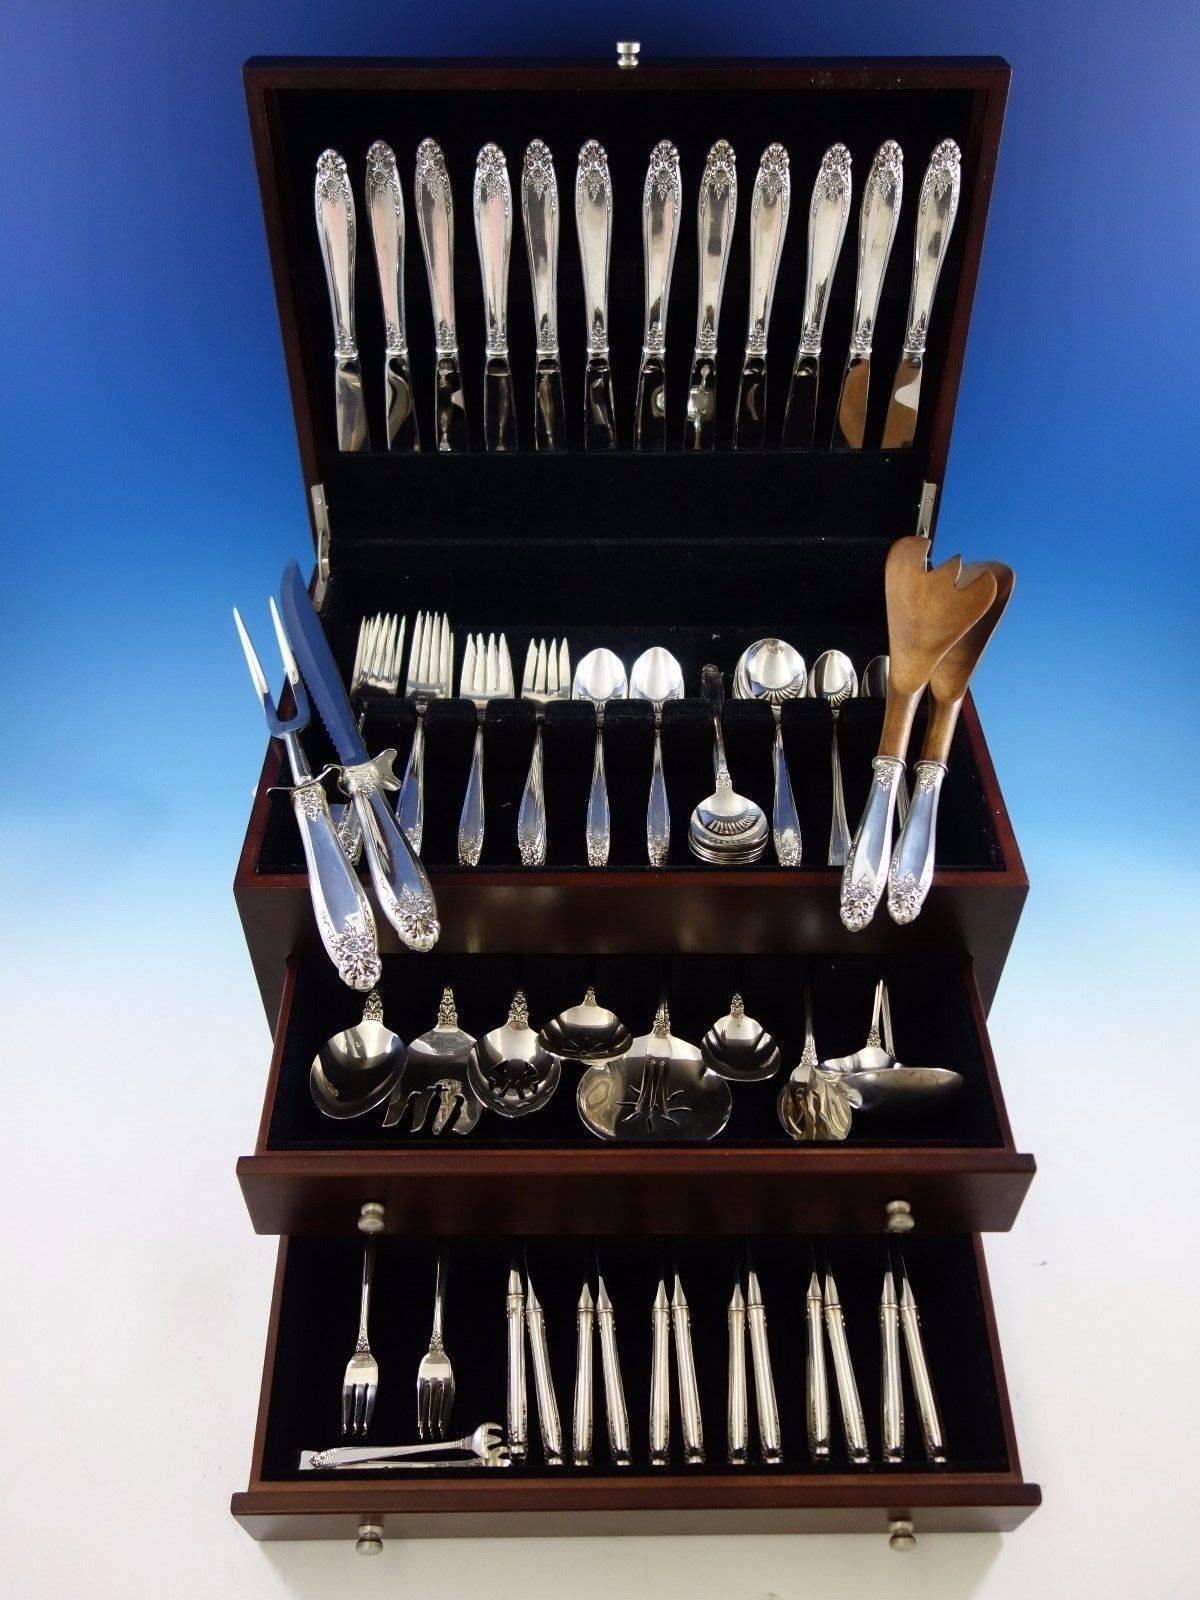 Prelude by International sterling silver flatware set, 114 pieces. This set includes: 

12 knives, 9 1/4